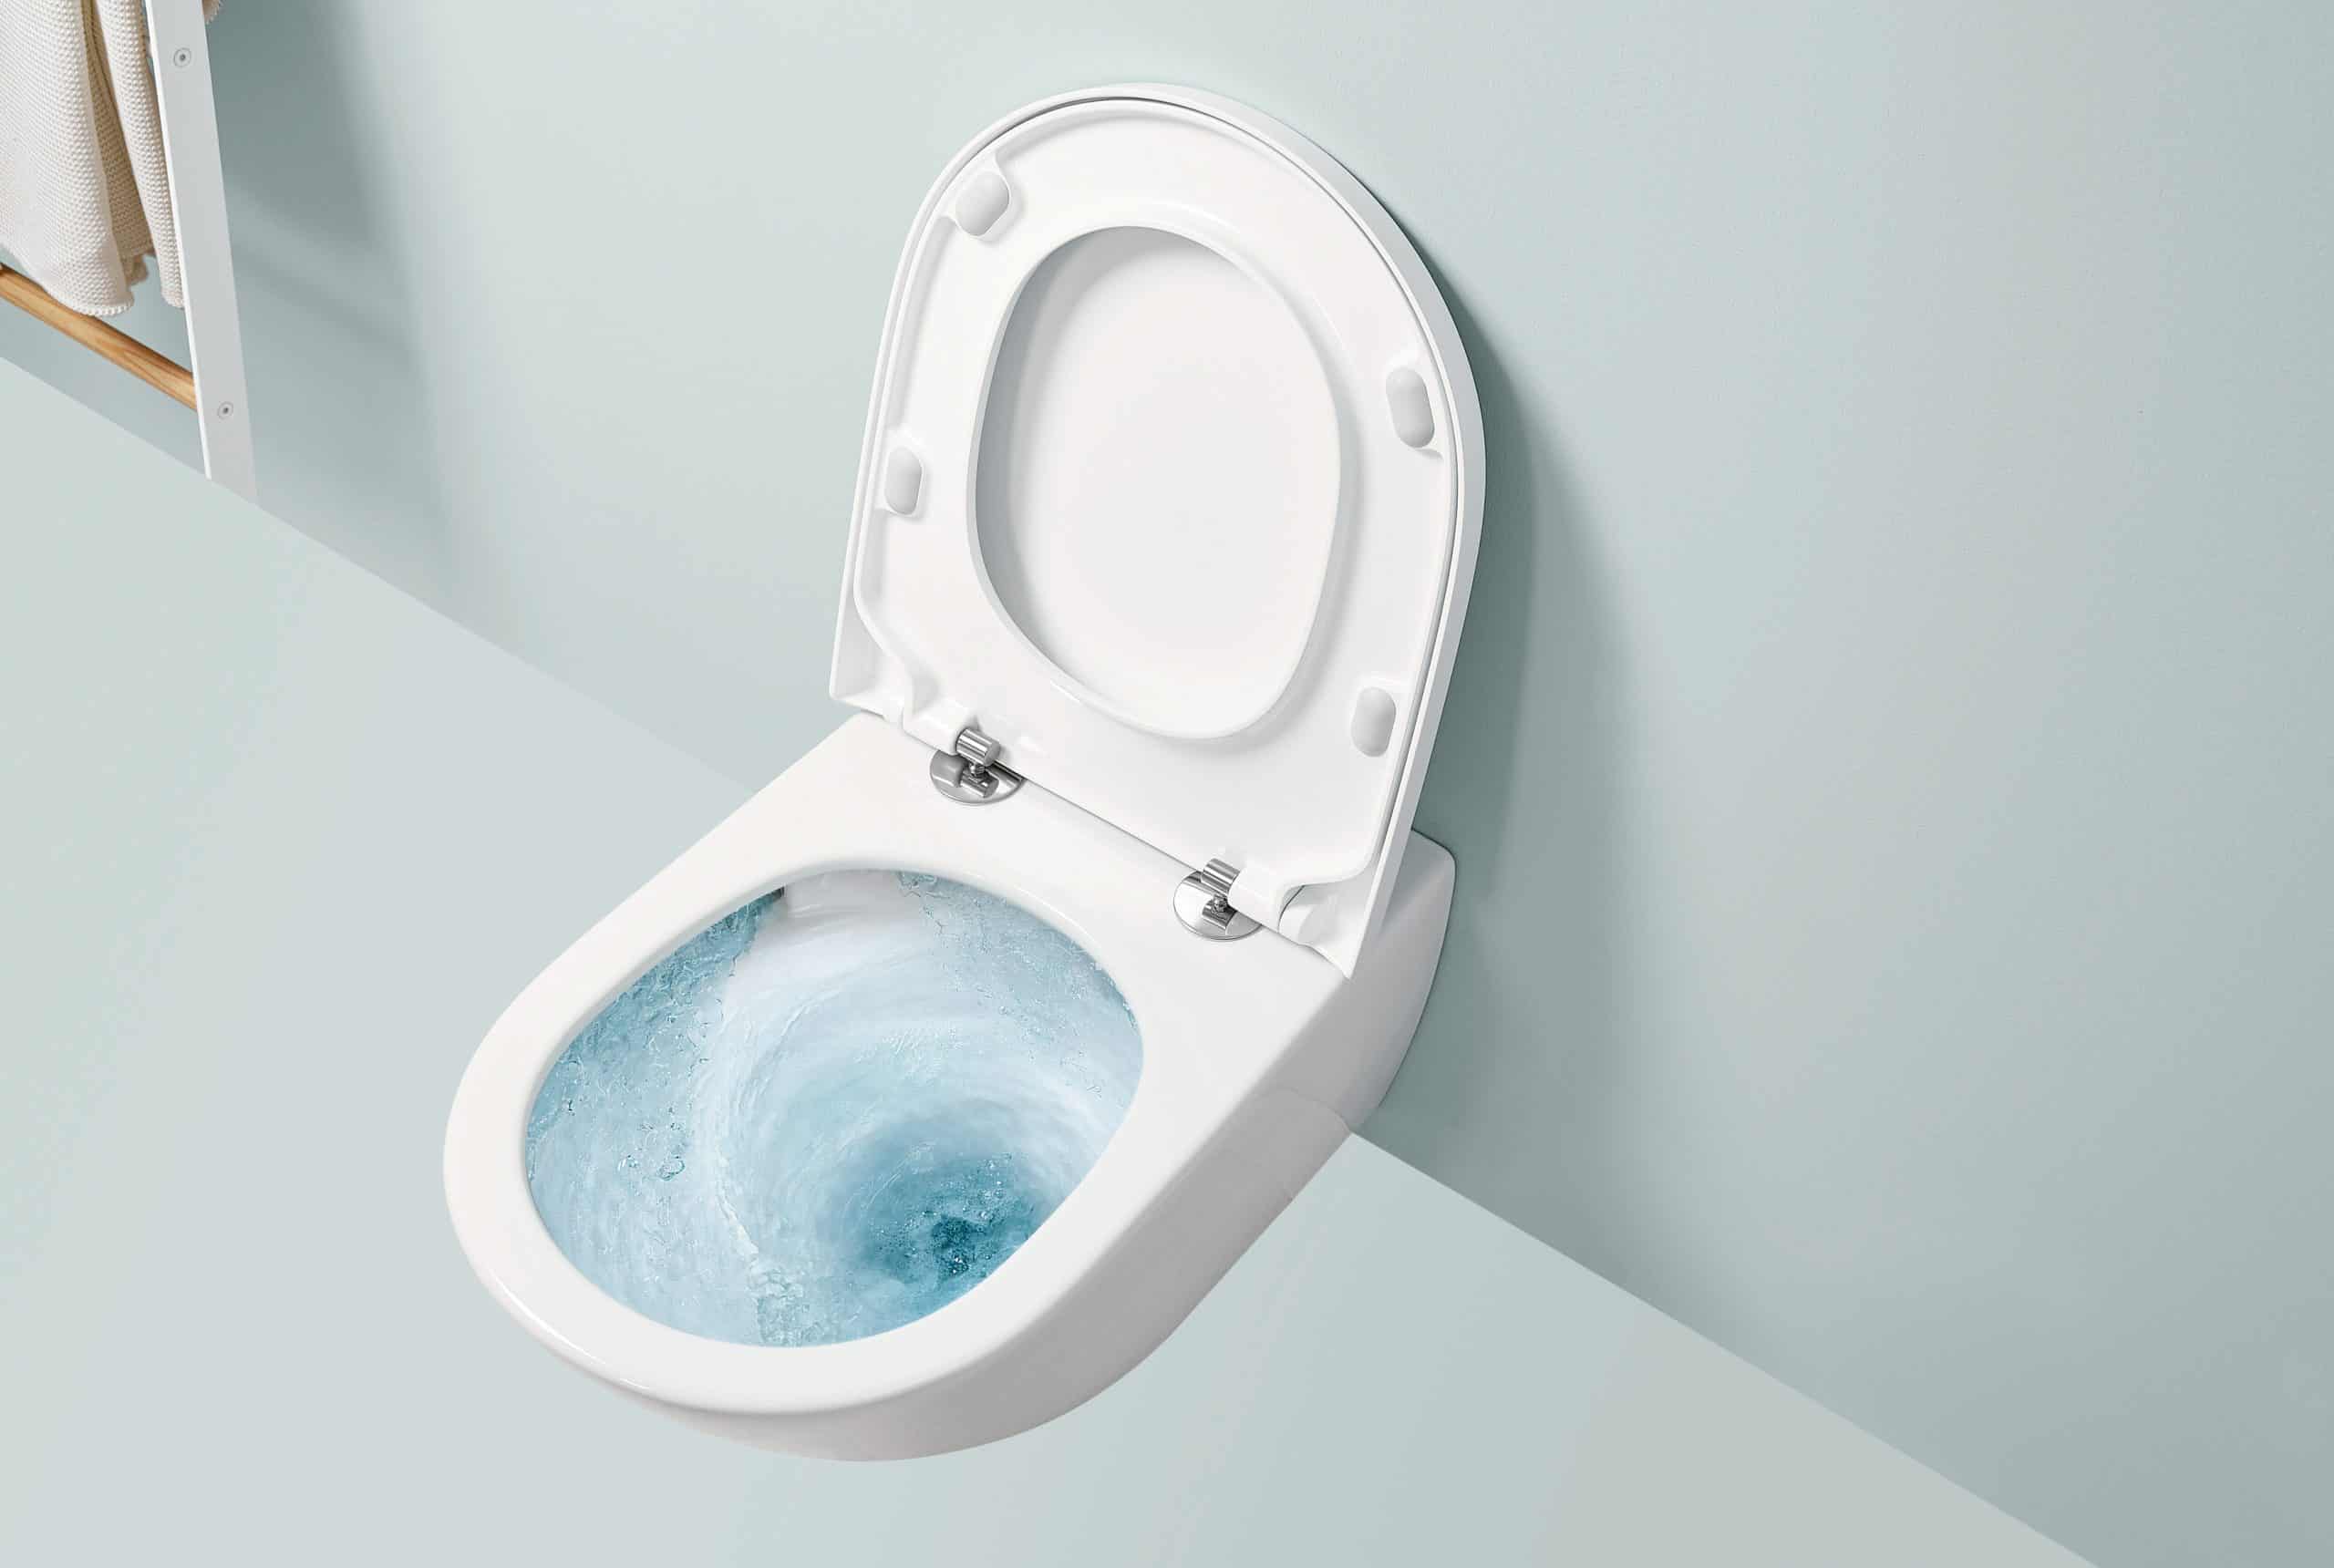 Villeroy & Boch subway 3.0 luxury bathroom collection with wall mounted toilet with twistflush technology